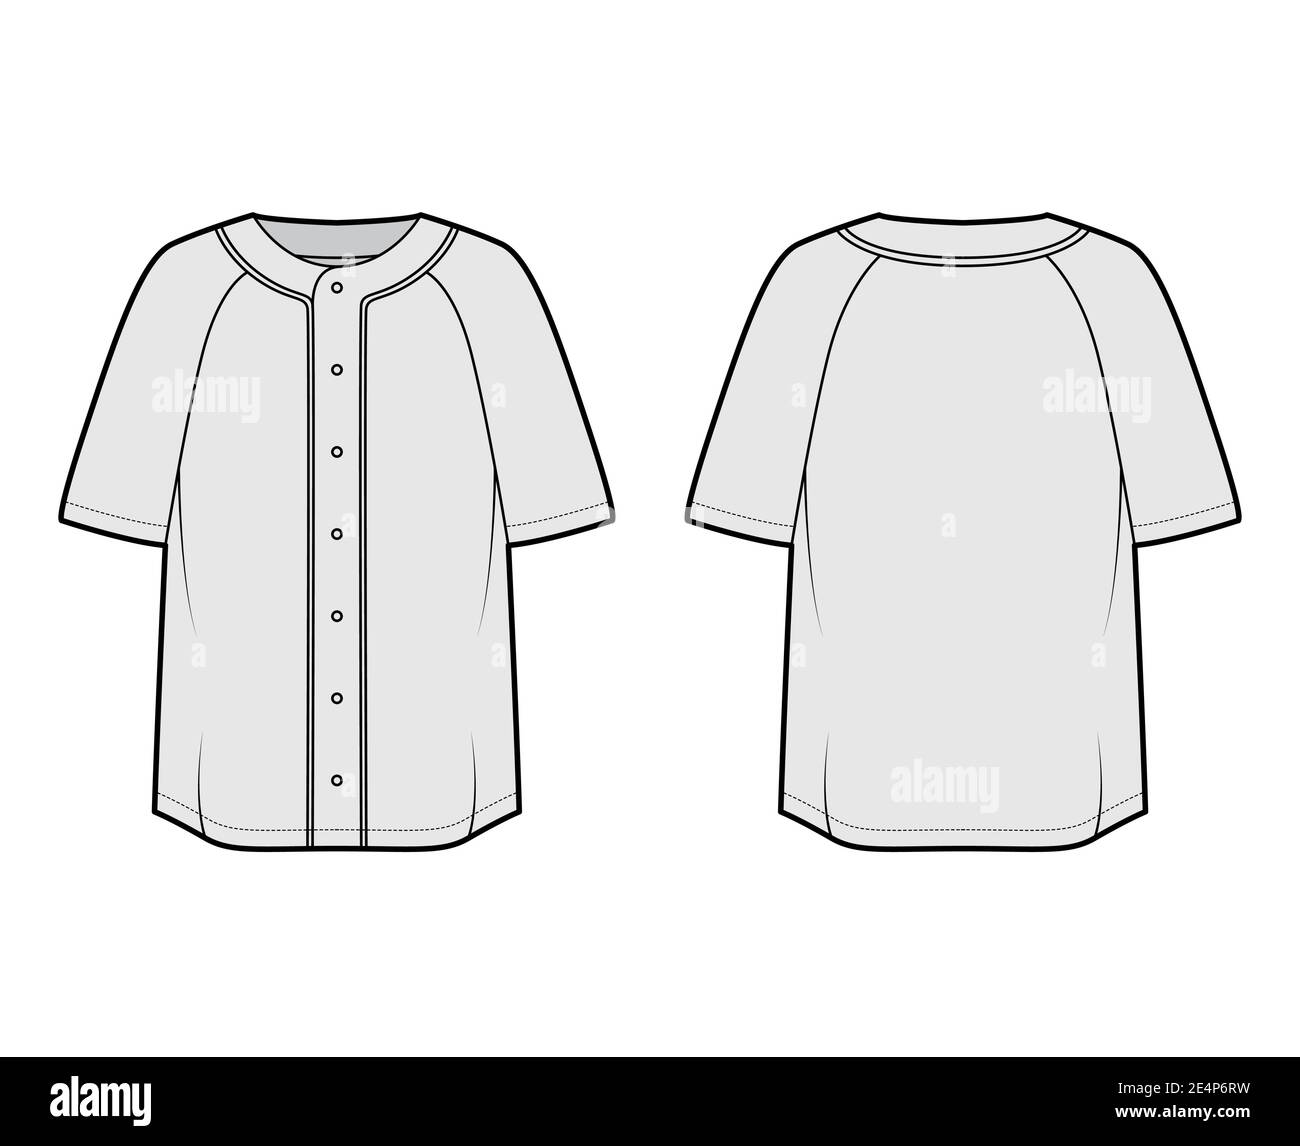 Shirt baseball button front technical fashion illustration with raglan  short sleeves, button up, oversized. Flat apparel jersey top outwear  template front, back grey color. Women men unisex CAD mockup Stock Vector  Image